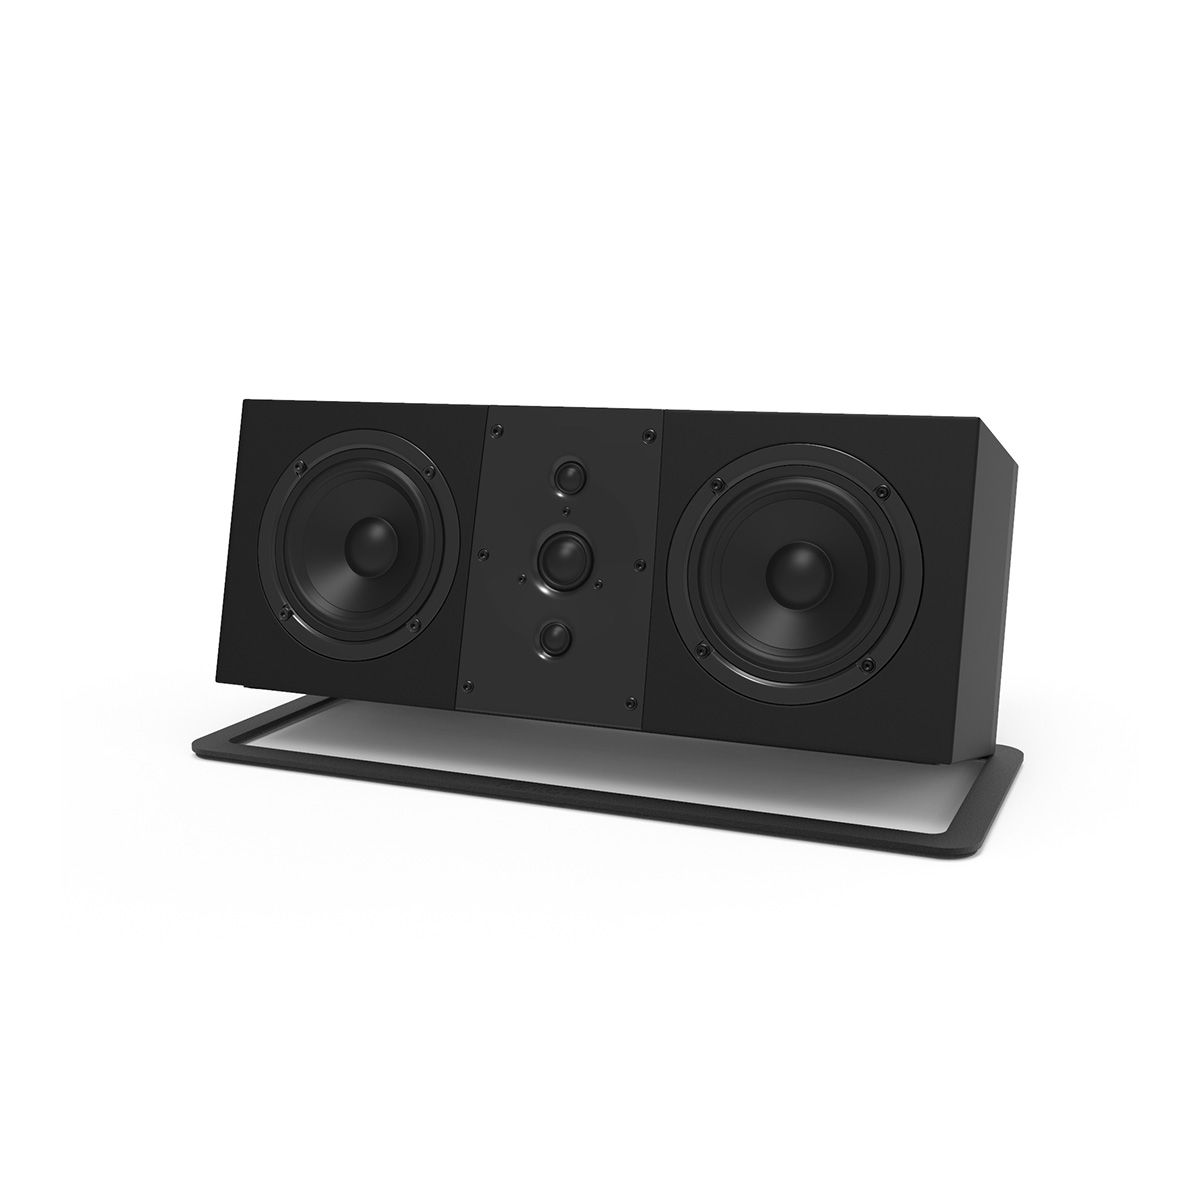 Kanto S10 Center Channel Speaker Stand - Black angled right front view with center channel